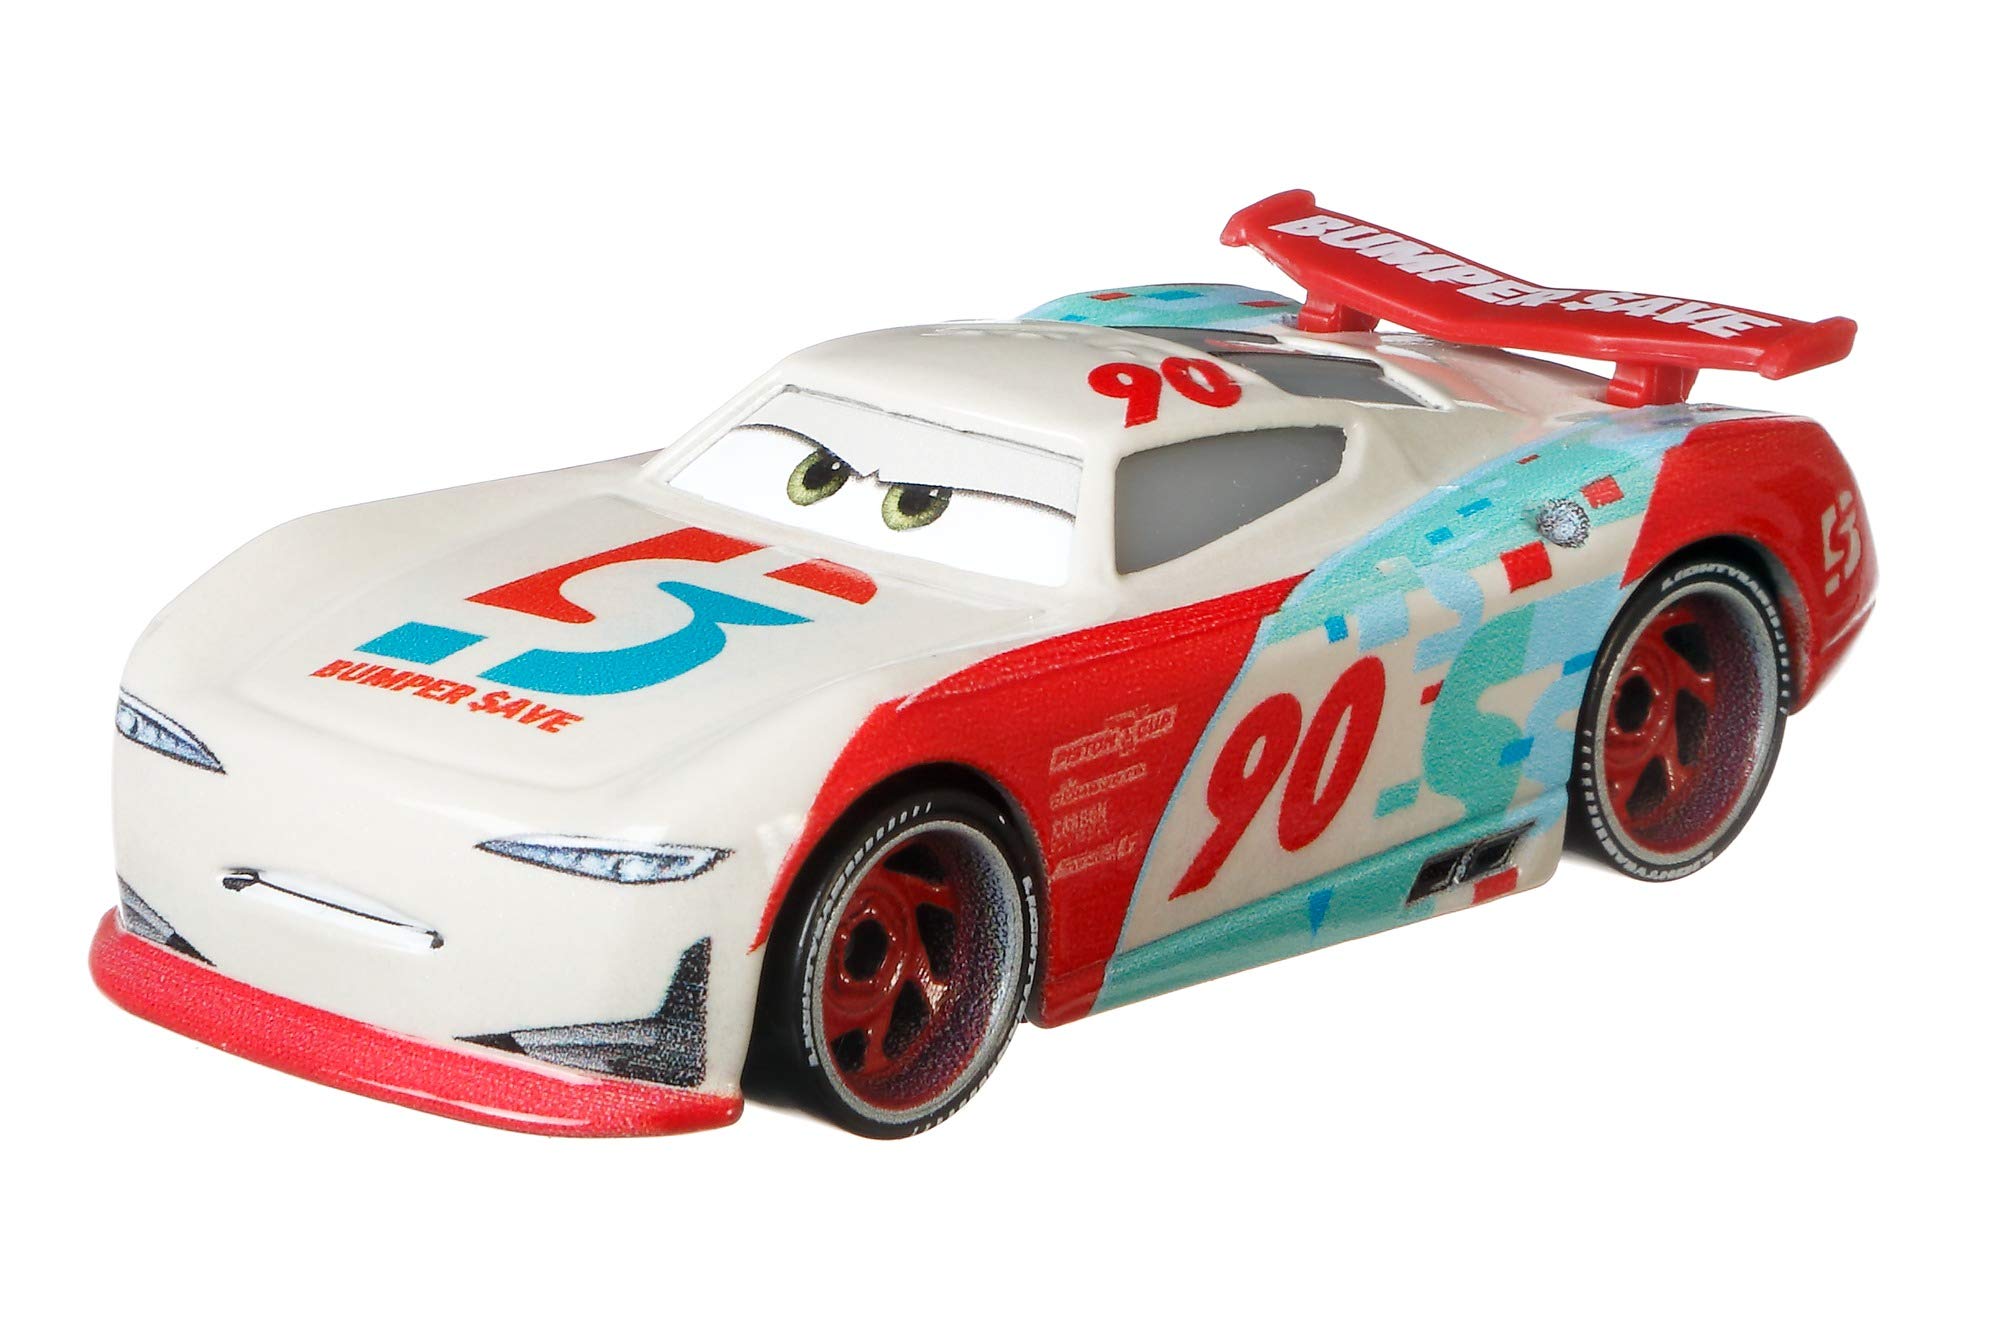 Disney Cars Toys Paul Conrev Die-cast Character Vehicles, Miniature, Collectible Racecar Automobile Toys Based on Cars Movies, for Kids Age 3 and Older